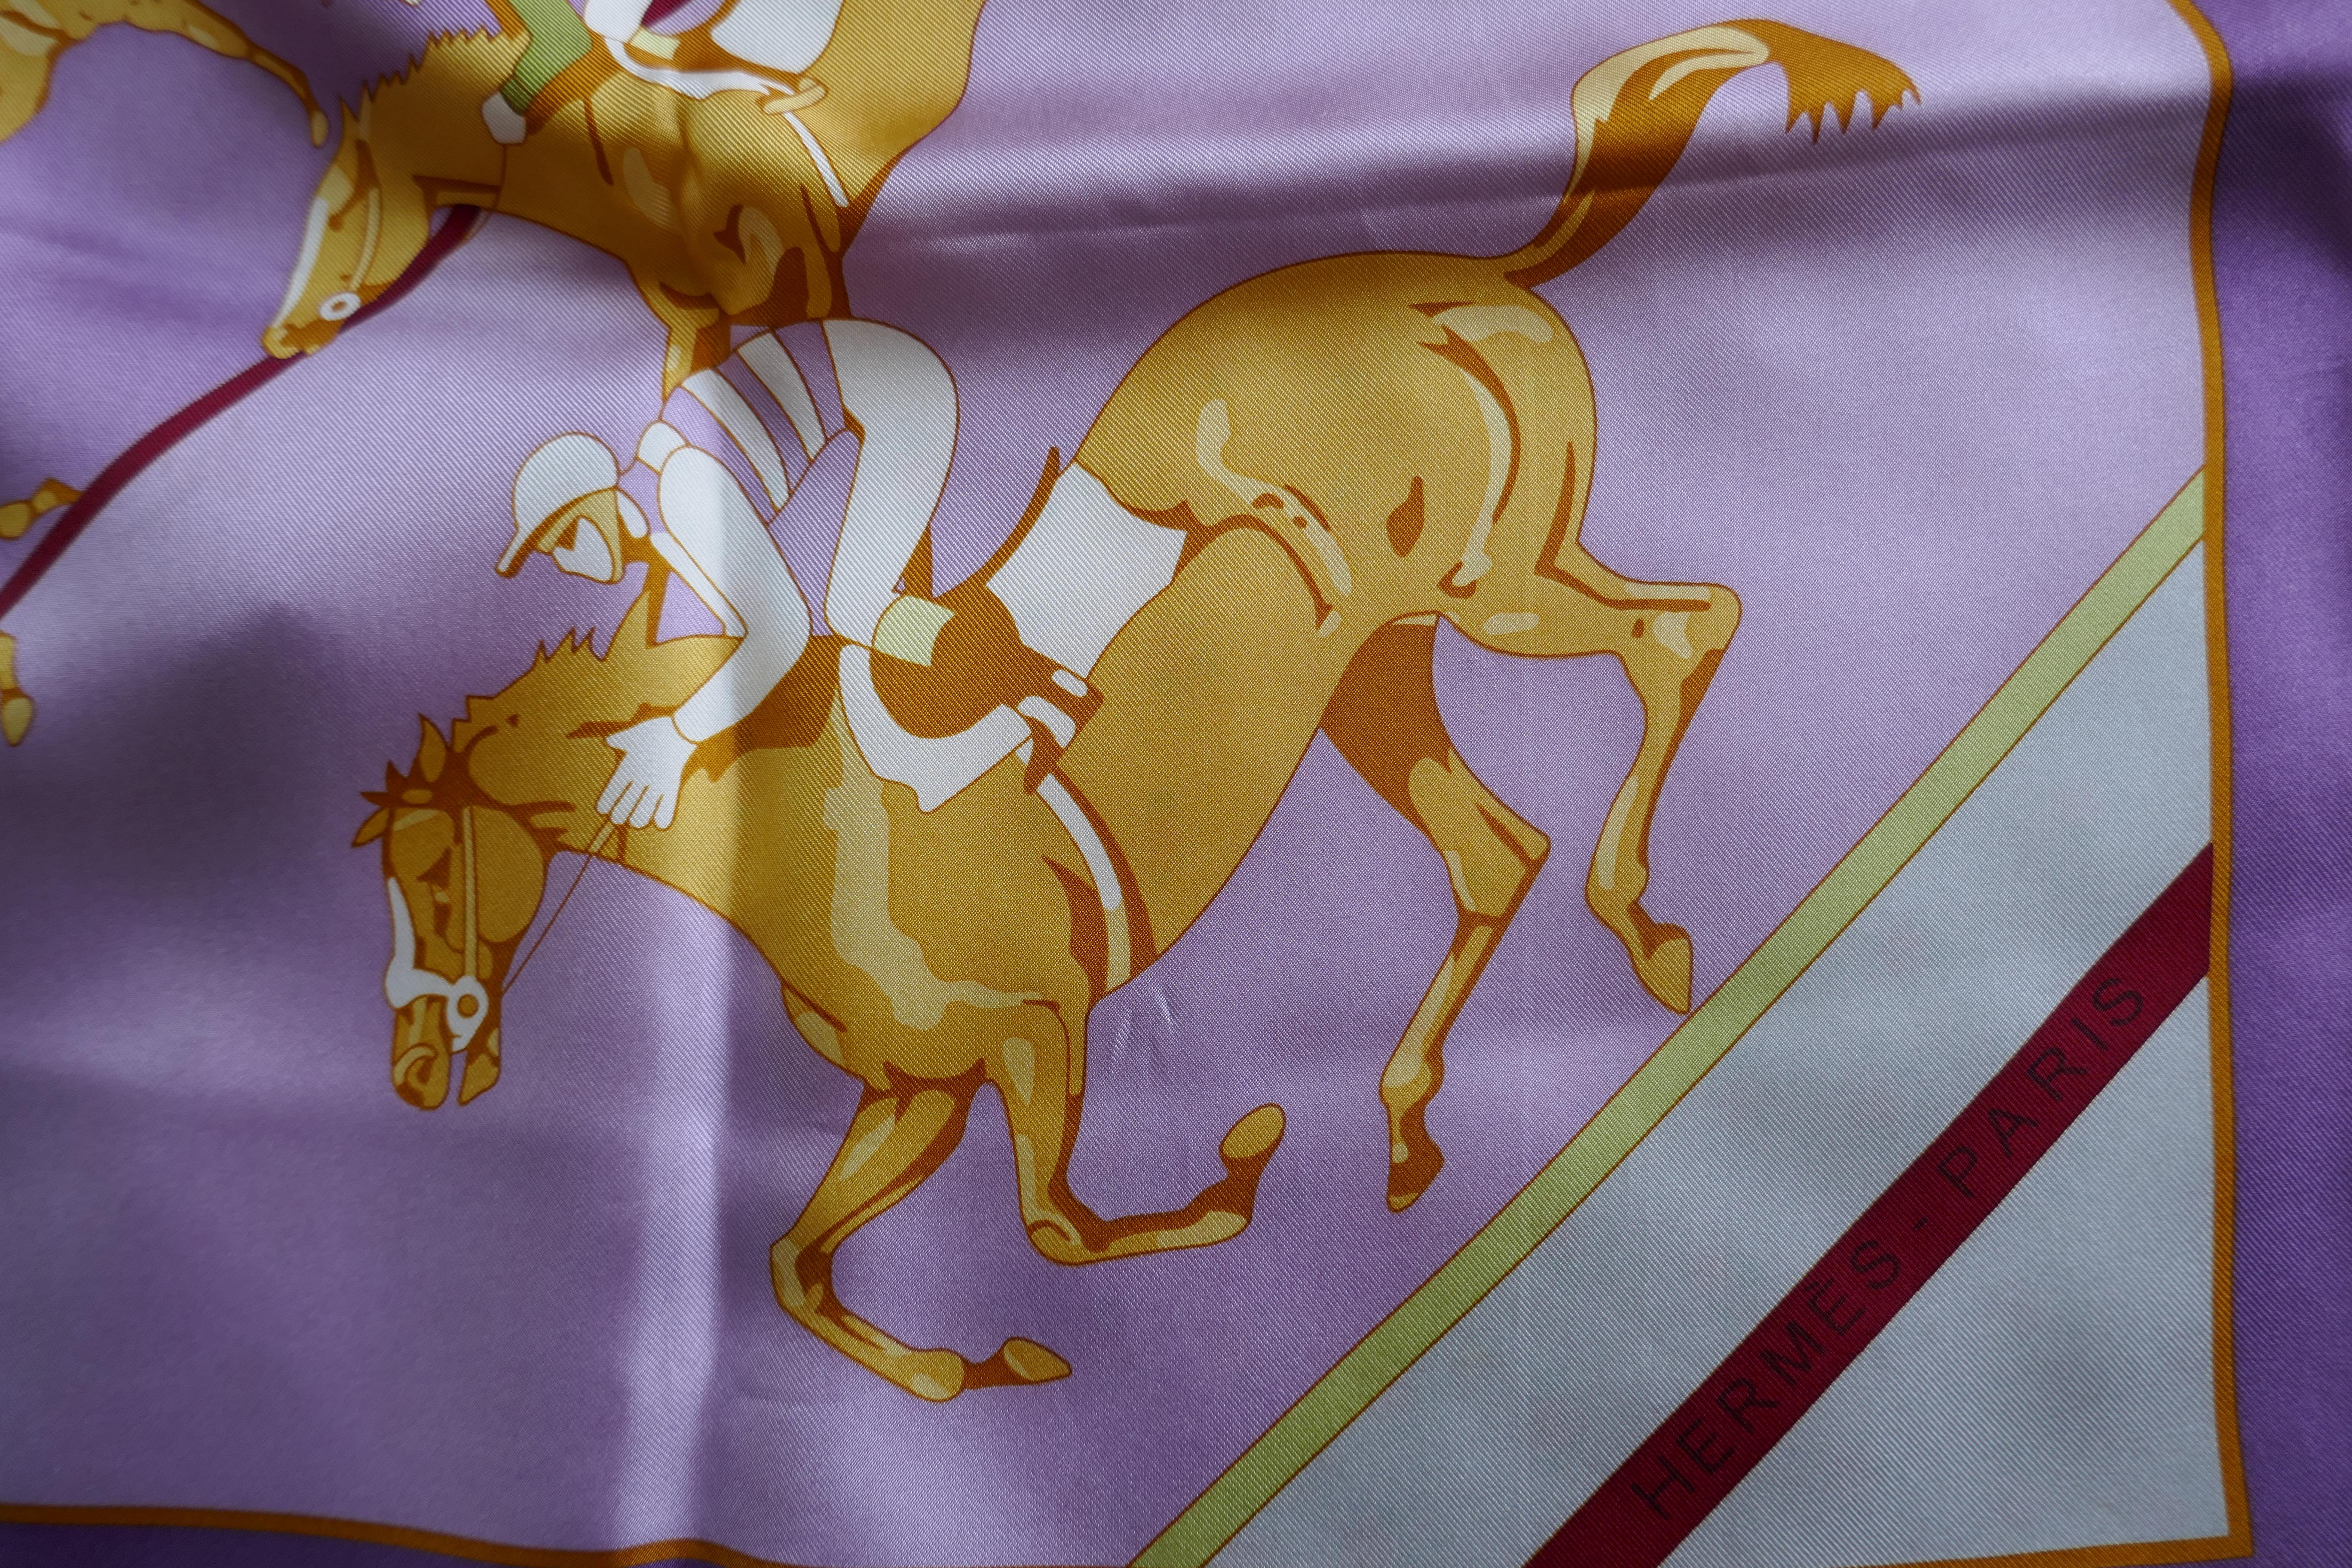 HERMÈS Silk Scarf, Benoist Gironiere design “Les Courses” 

In unworn good condition,  
Logo and HERMÈs-Paris
The scarf is in Lilac and Burgundy
The Scarf is 35” x 35” 100% Silk with hand rolled hems

F45